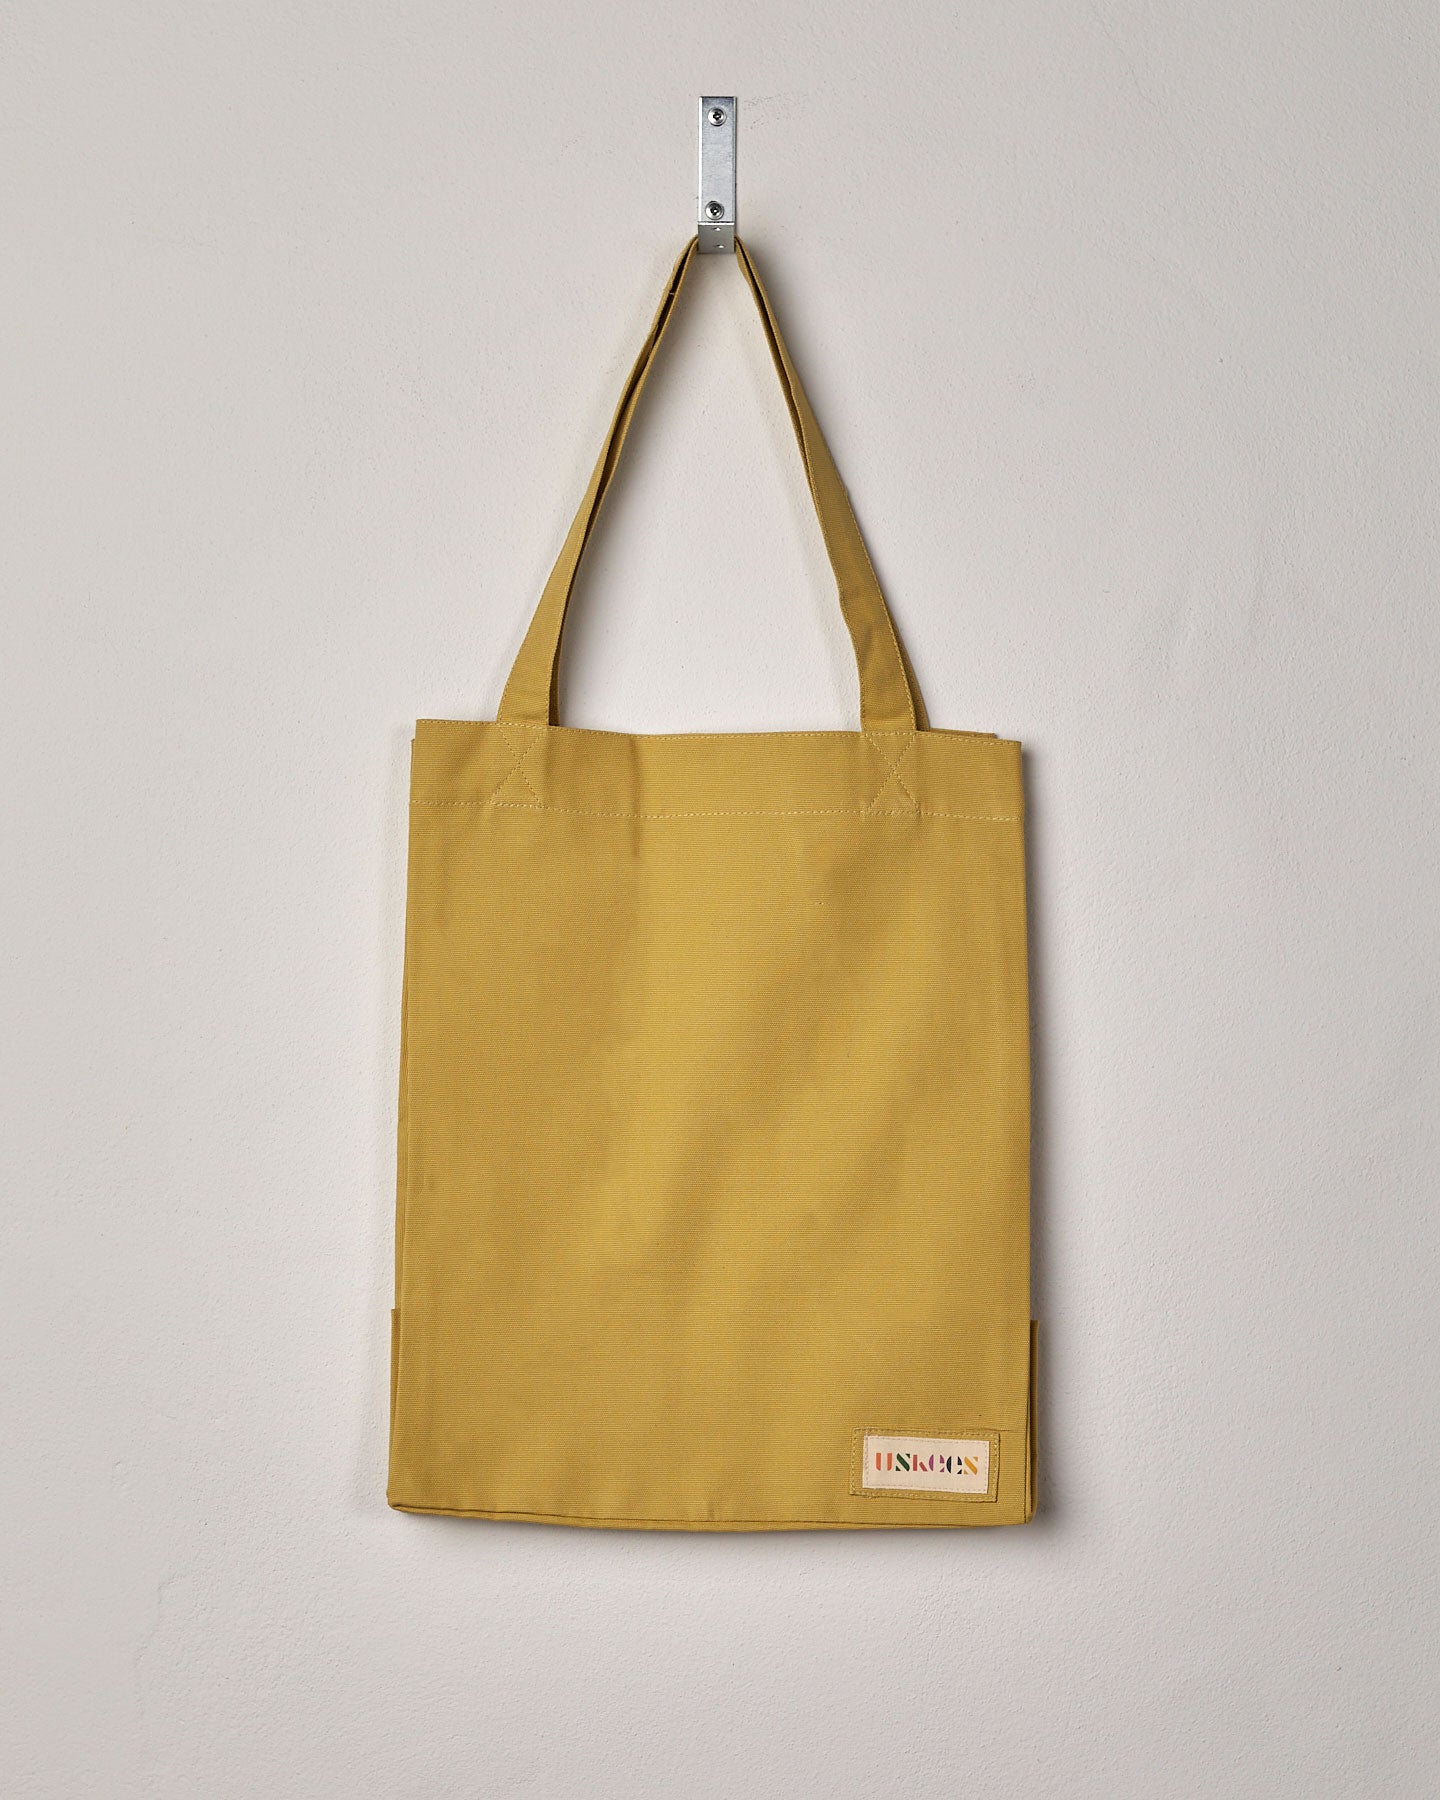 Full front hanging shot of Uskees #4002 small citronella-yellow tote bag, showing double handles and Uskees woven logo.